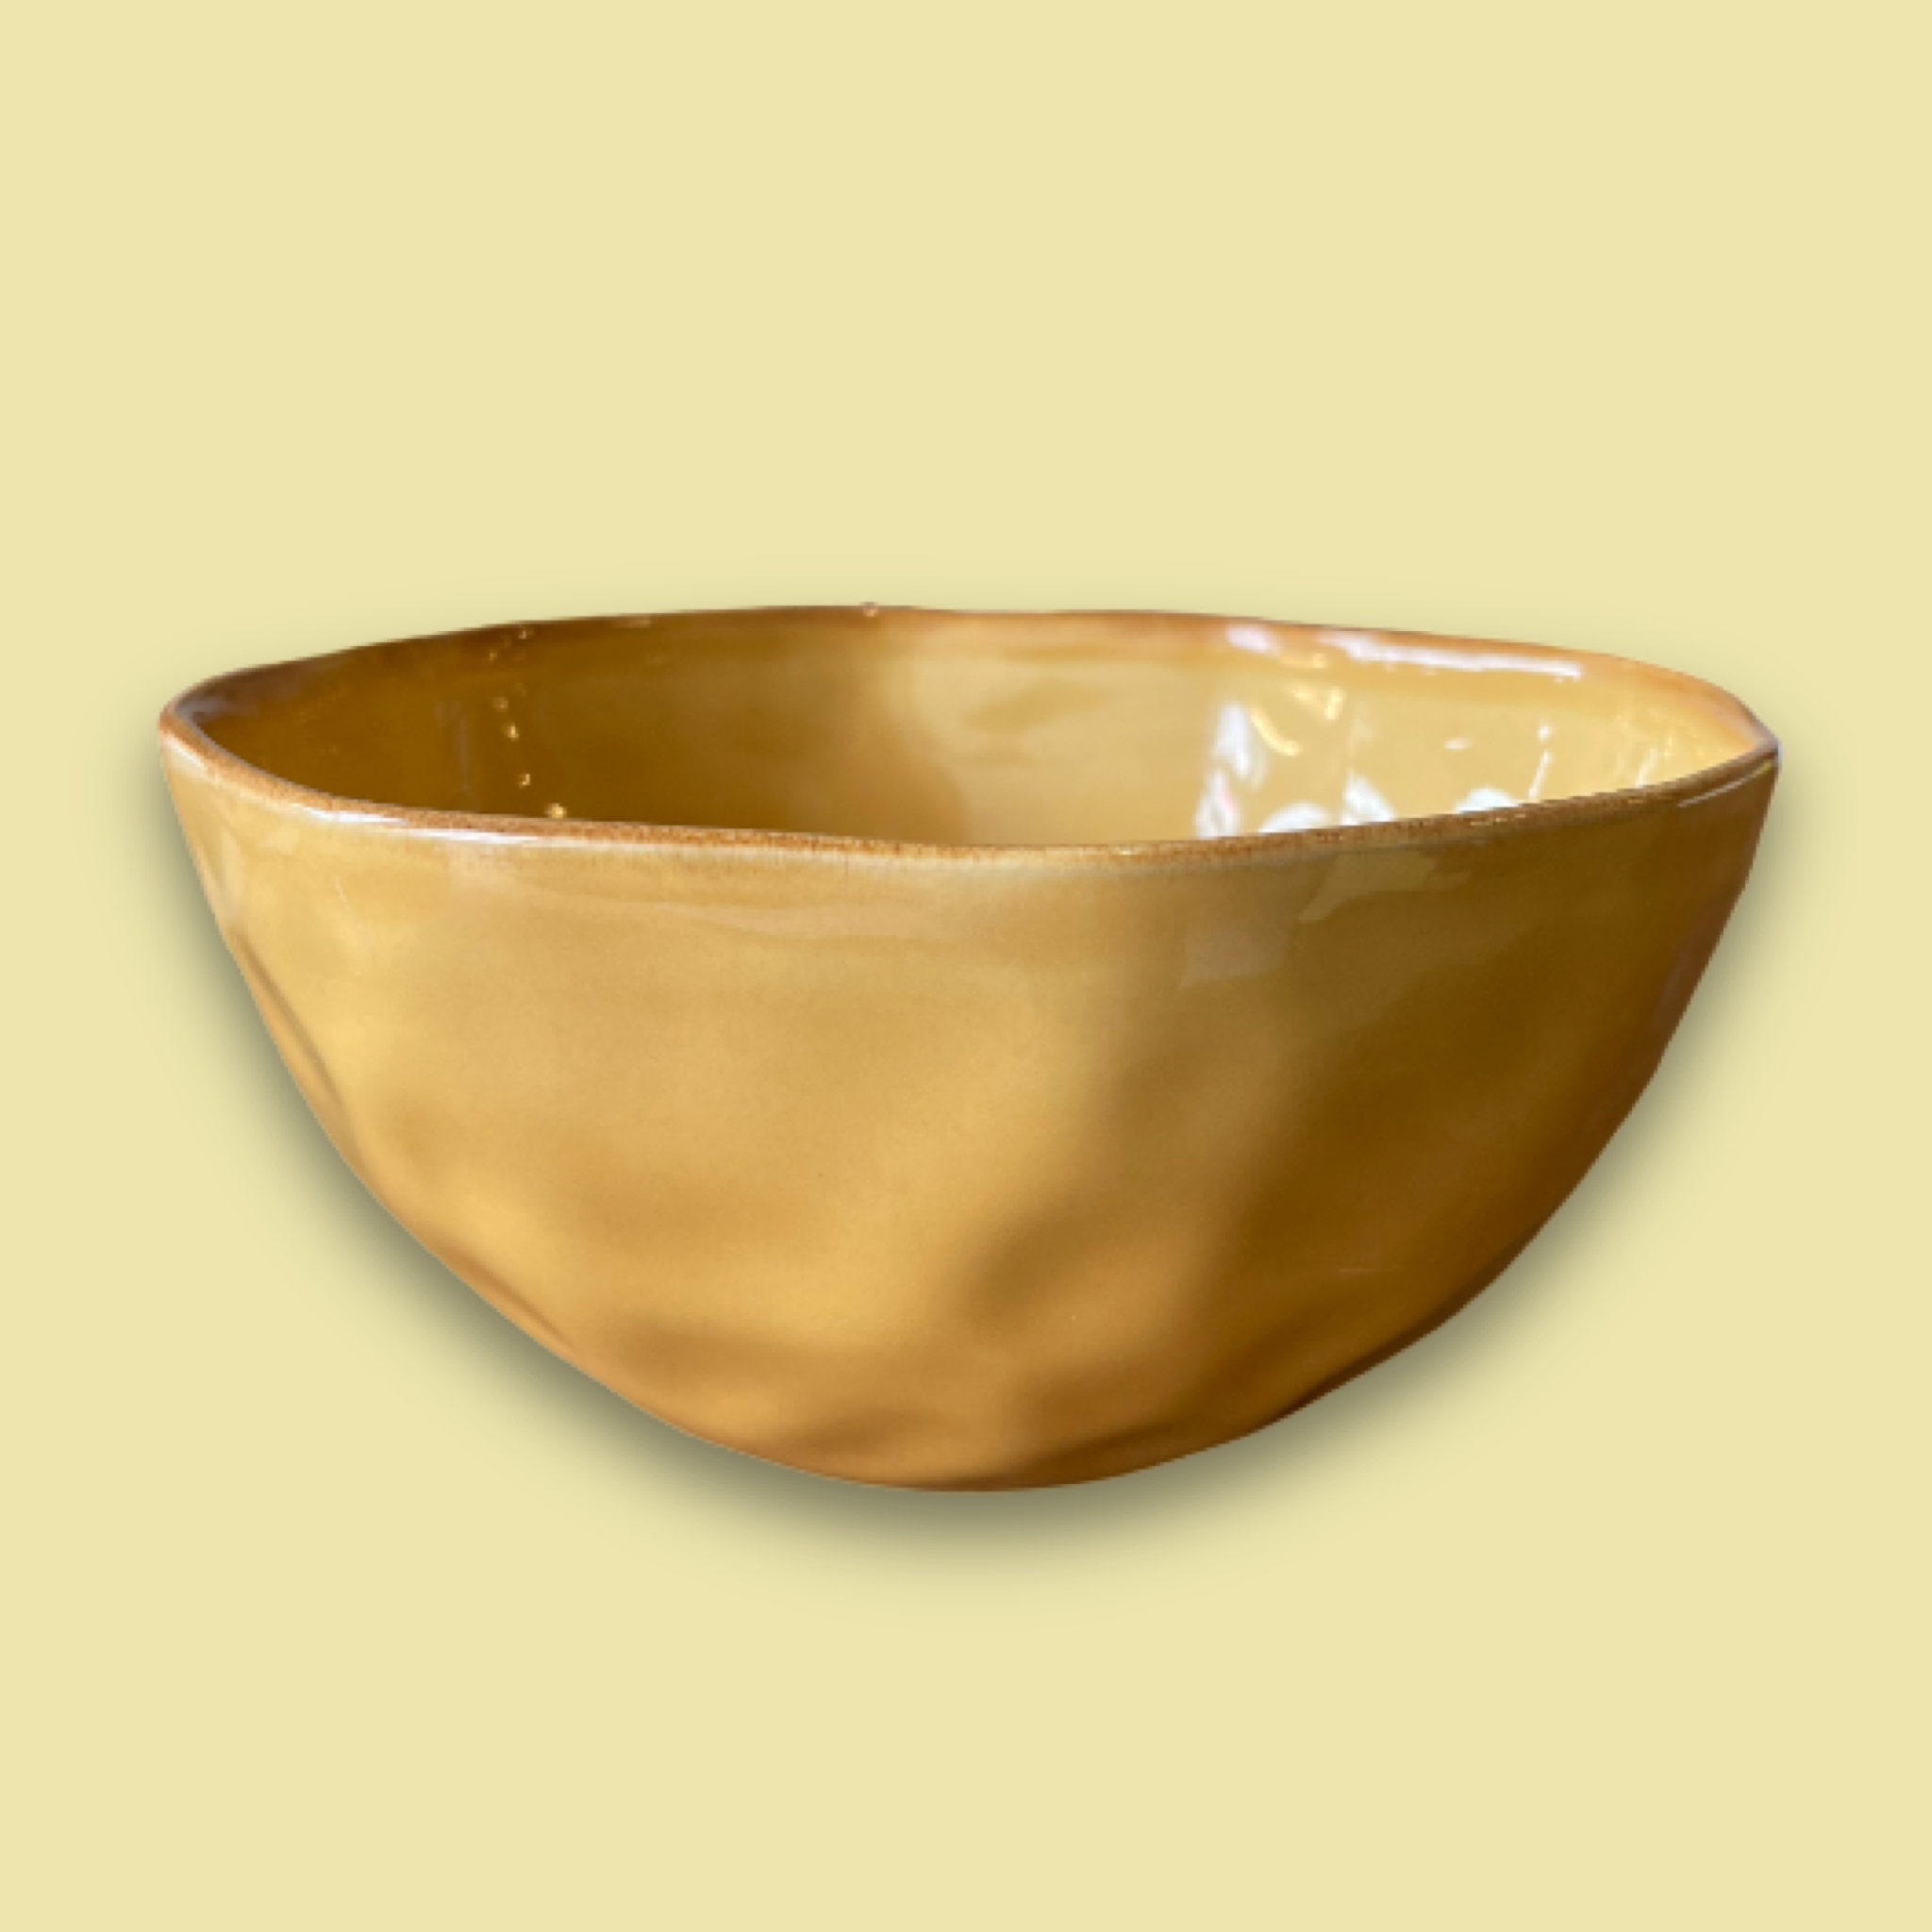 YELLOW METEORITE BOWL by Suuuper